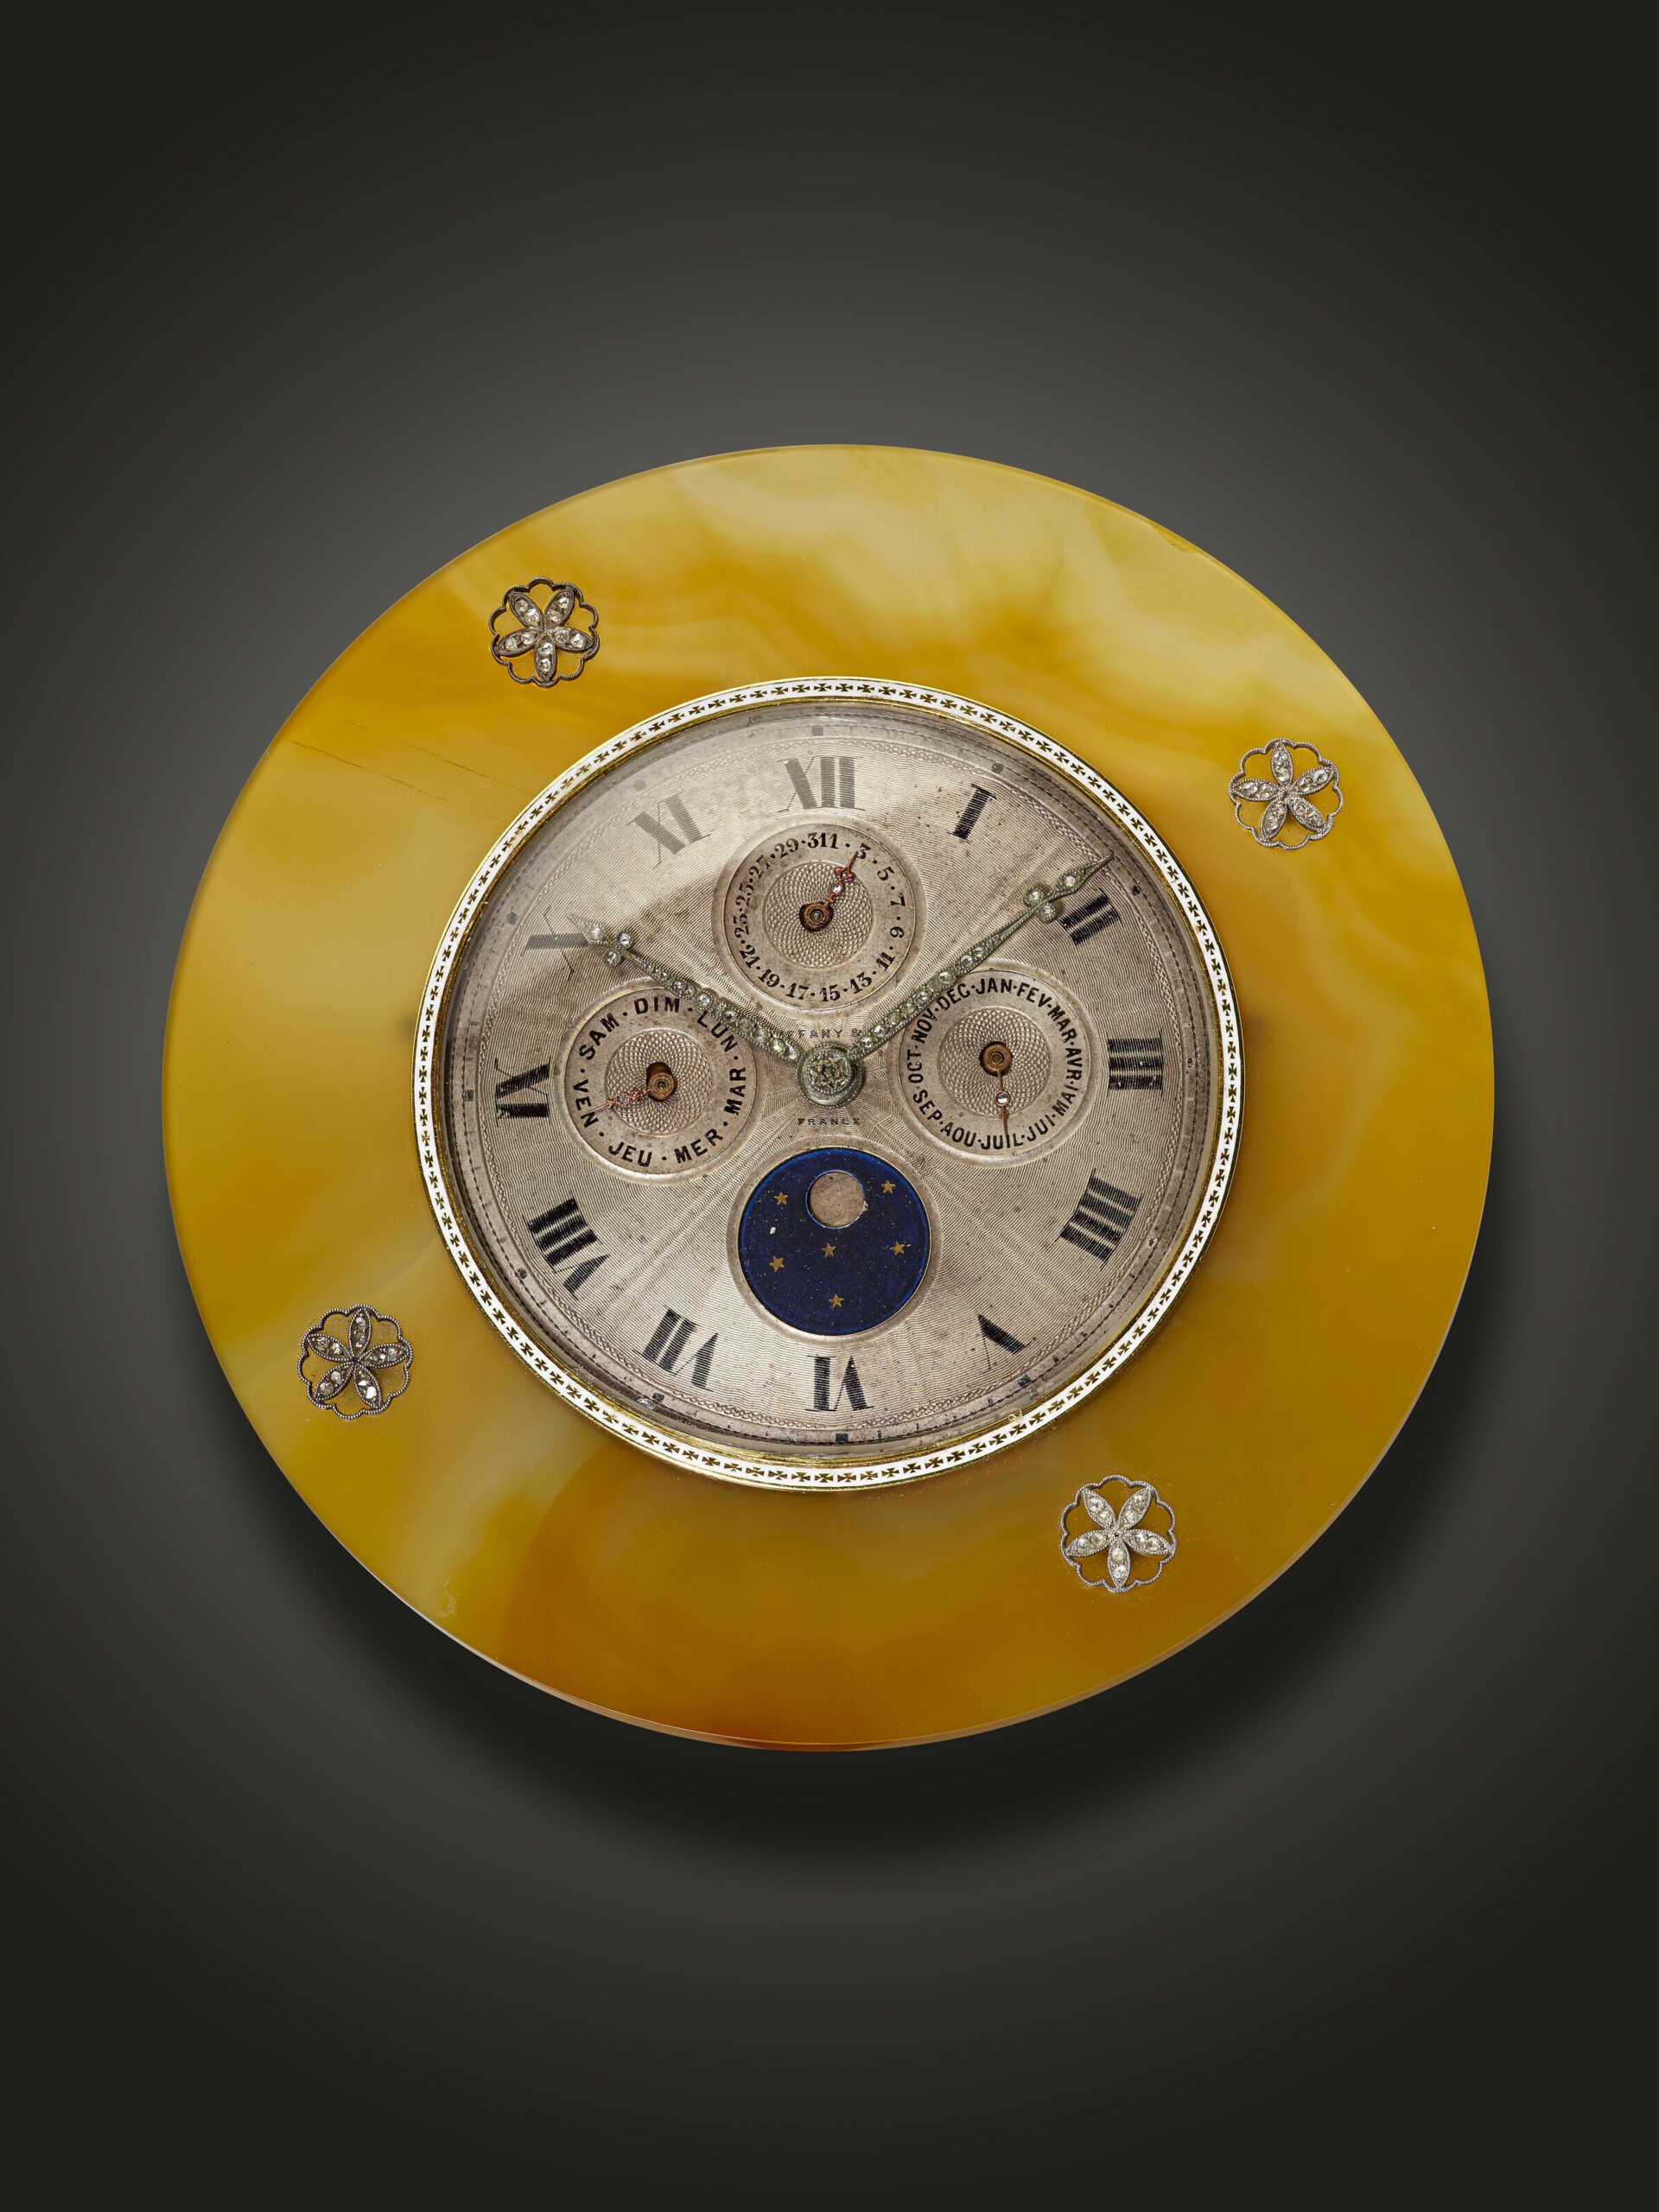 TIFFANY & CO, AGATE AND DIAMOND-SET PERPETUAL CALENDAR DESK CLOCK 'A BELLE EPOQUE', WITH MOON PHASES